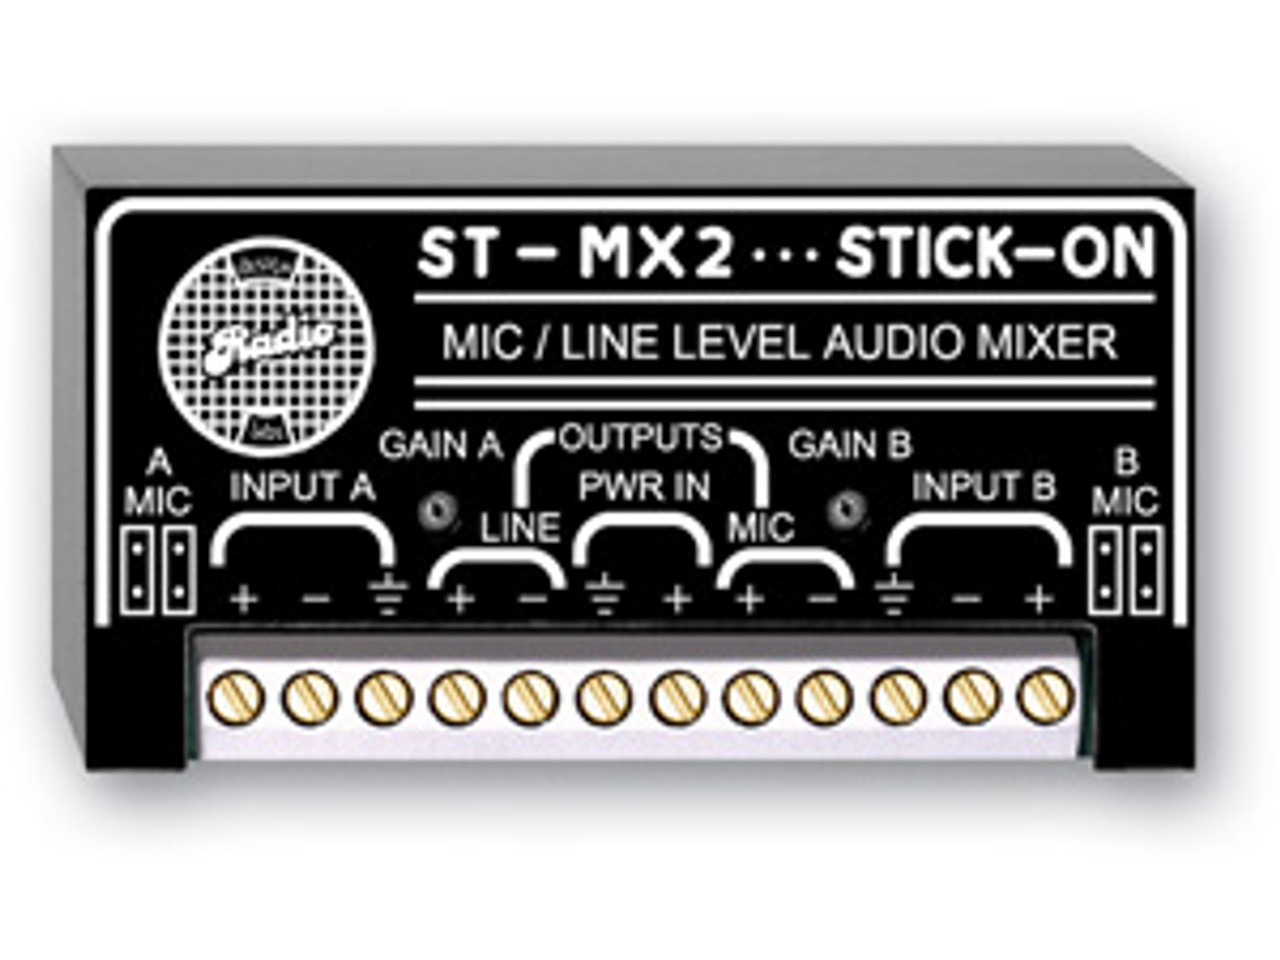 RDL ST-MX2 Two-Channel Audio Mixer with Mic/Line Inputs and Outputs (ST-MX2)